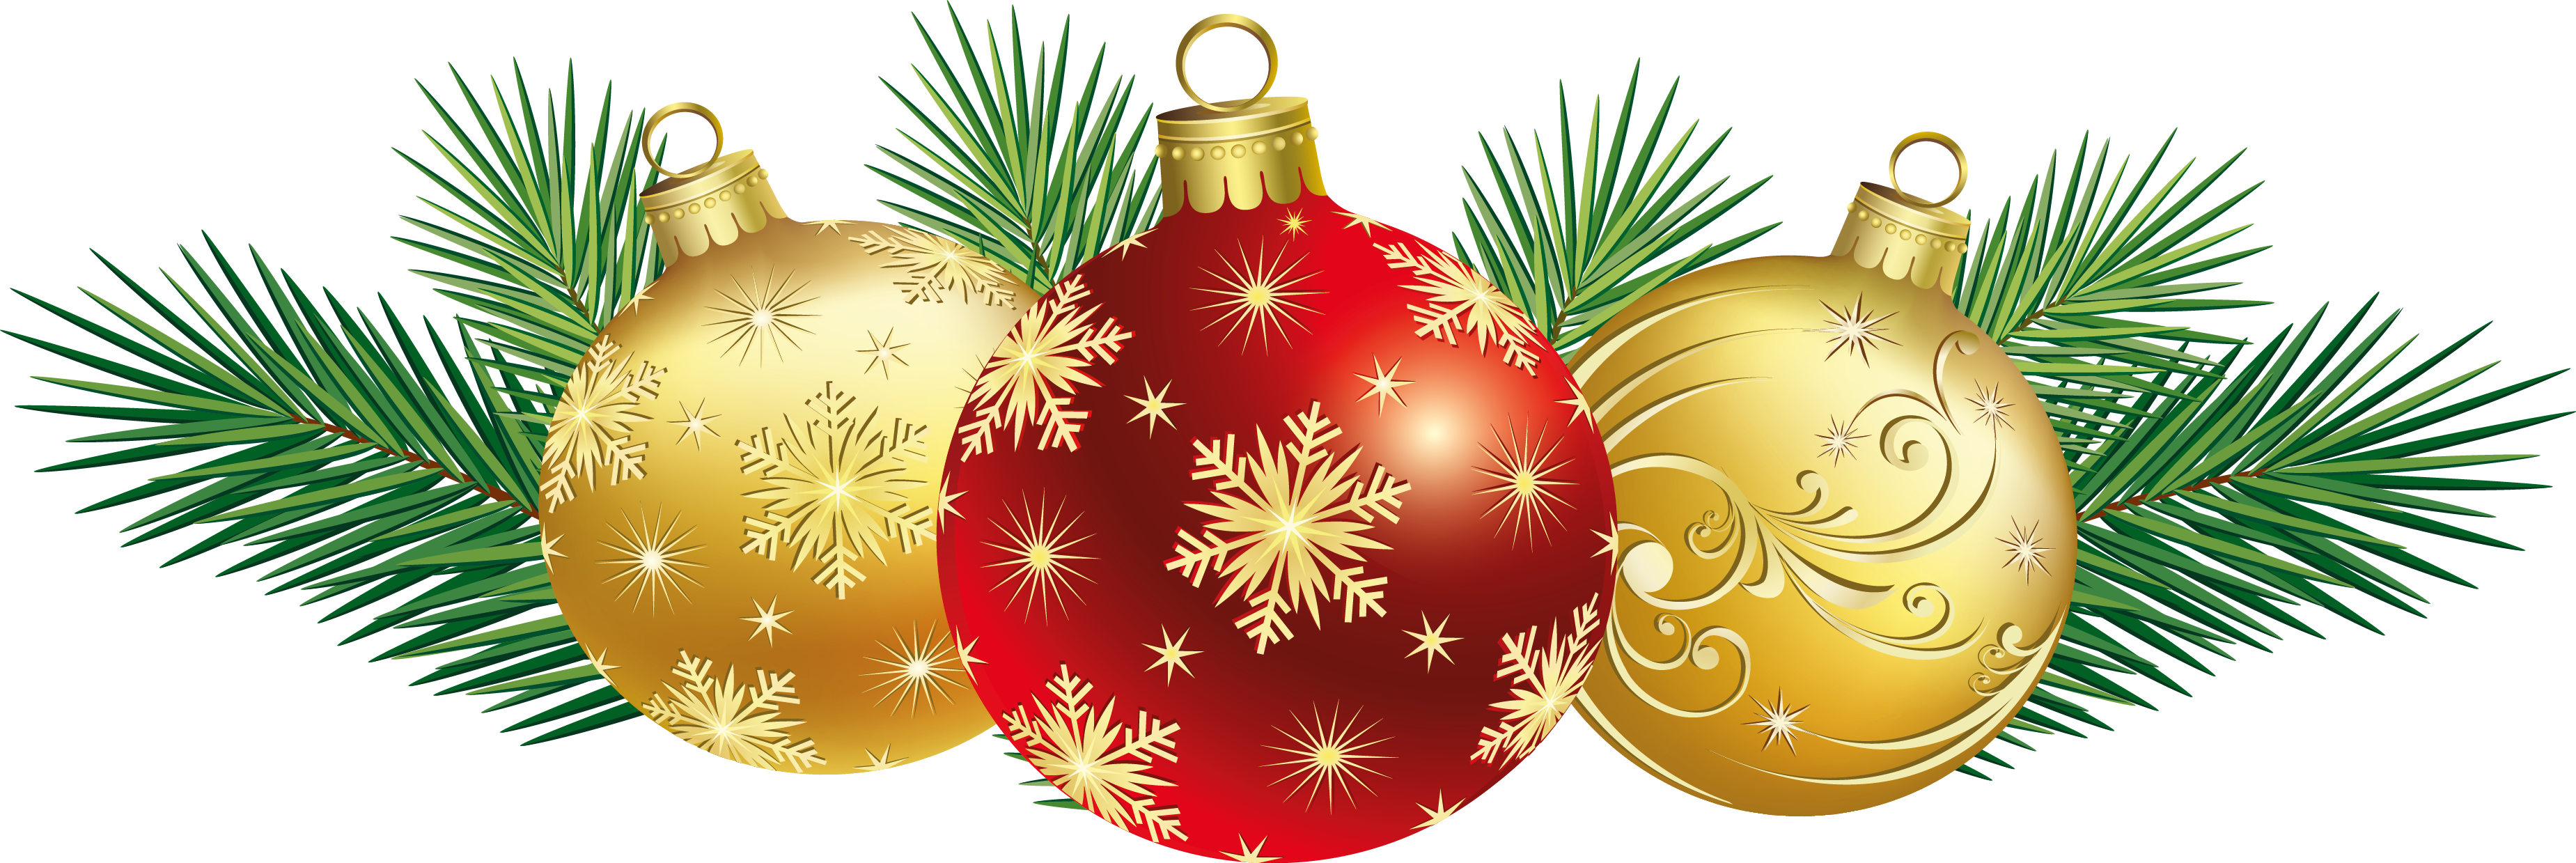 christmas clipart decorations - photo #5